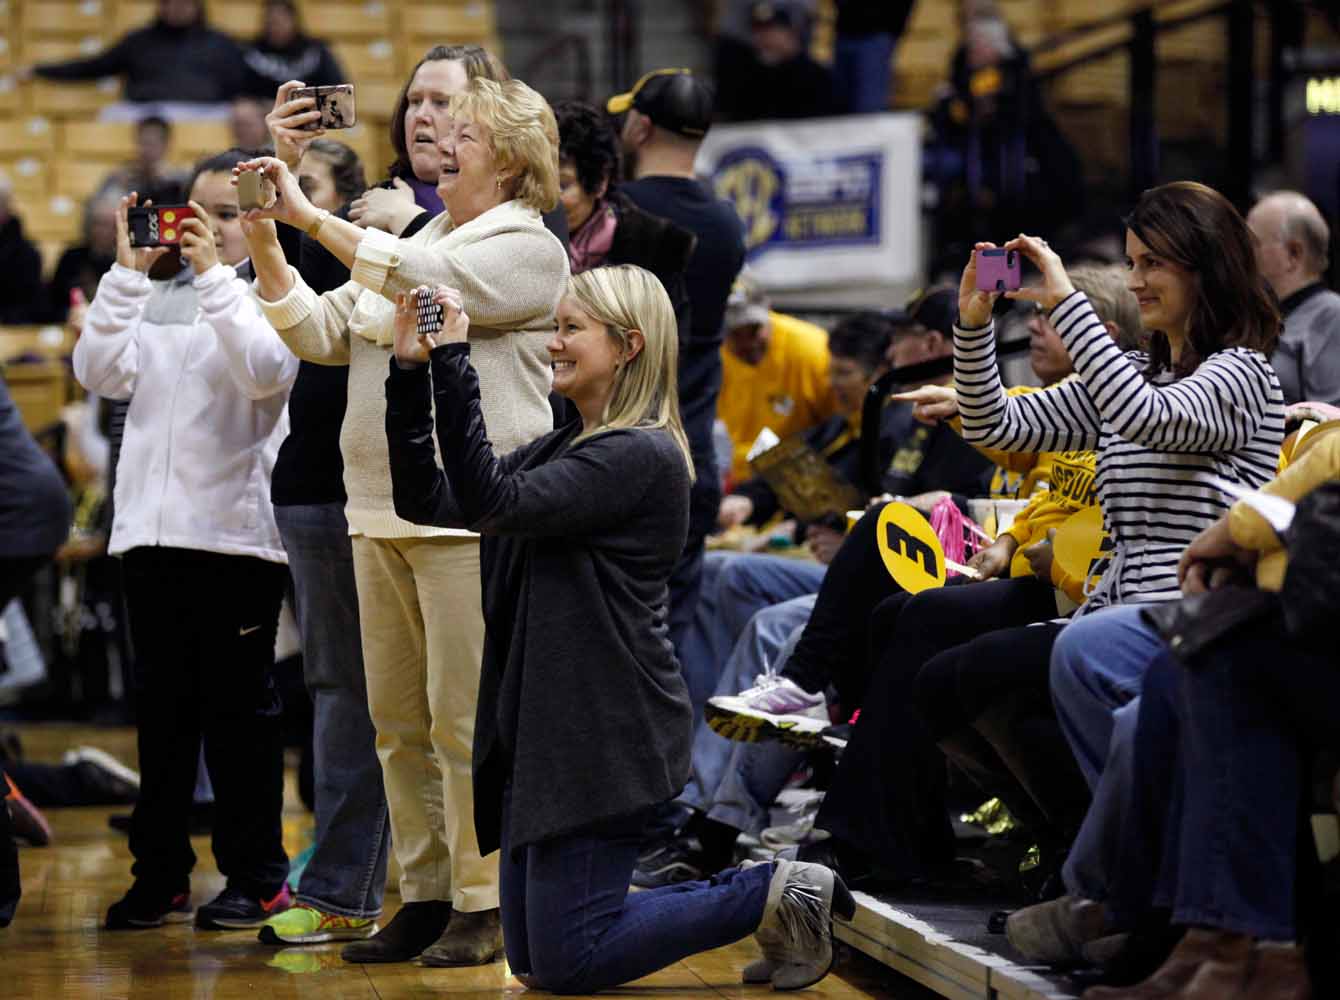 Parents record their daughters on their cell phones during a pre-game show with the Golden Girls Thursday evening, Feb. 11, 2016 at Mizzou Arena.